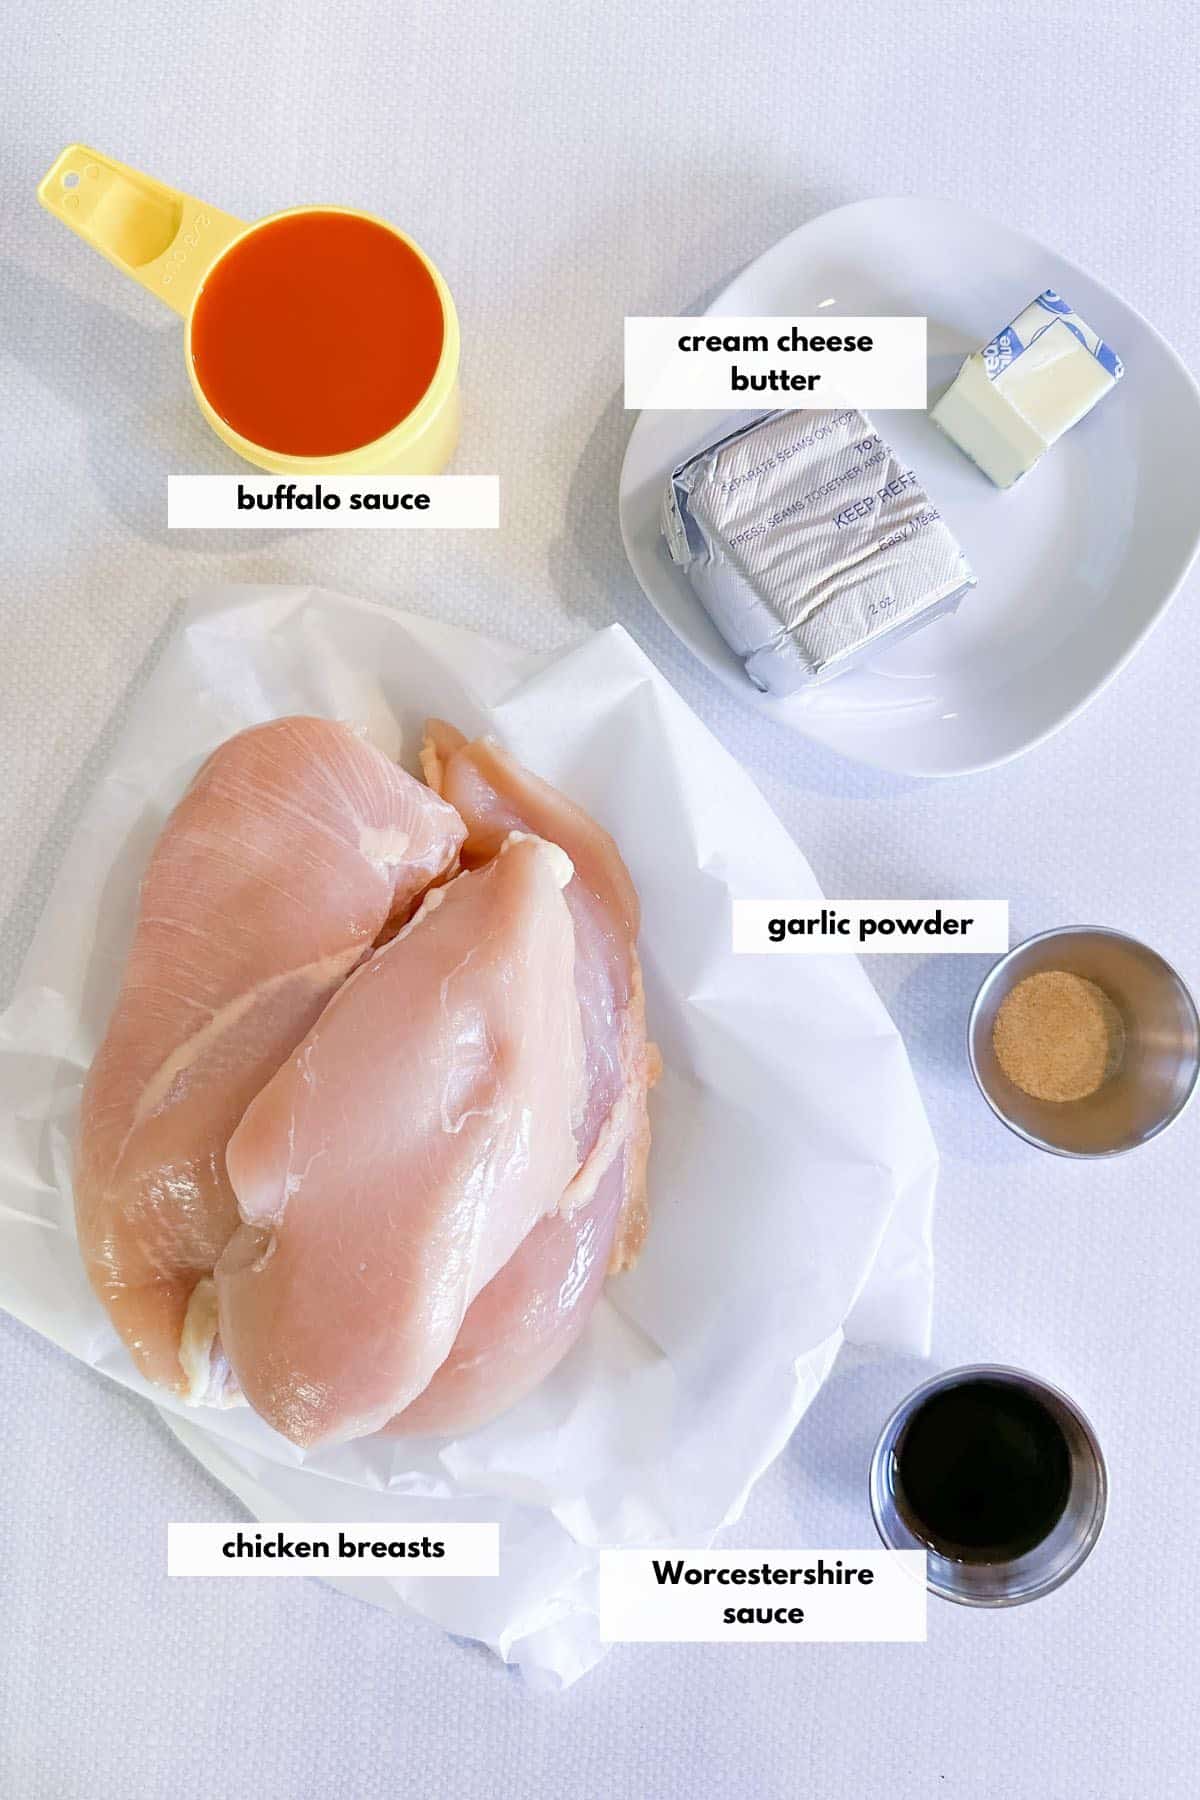 Ingredients to make pulled buffalo chicken including chicken breasts, buffalo sauce, cream cheese, butter, garlic powder and Worcestershire sauce.